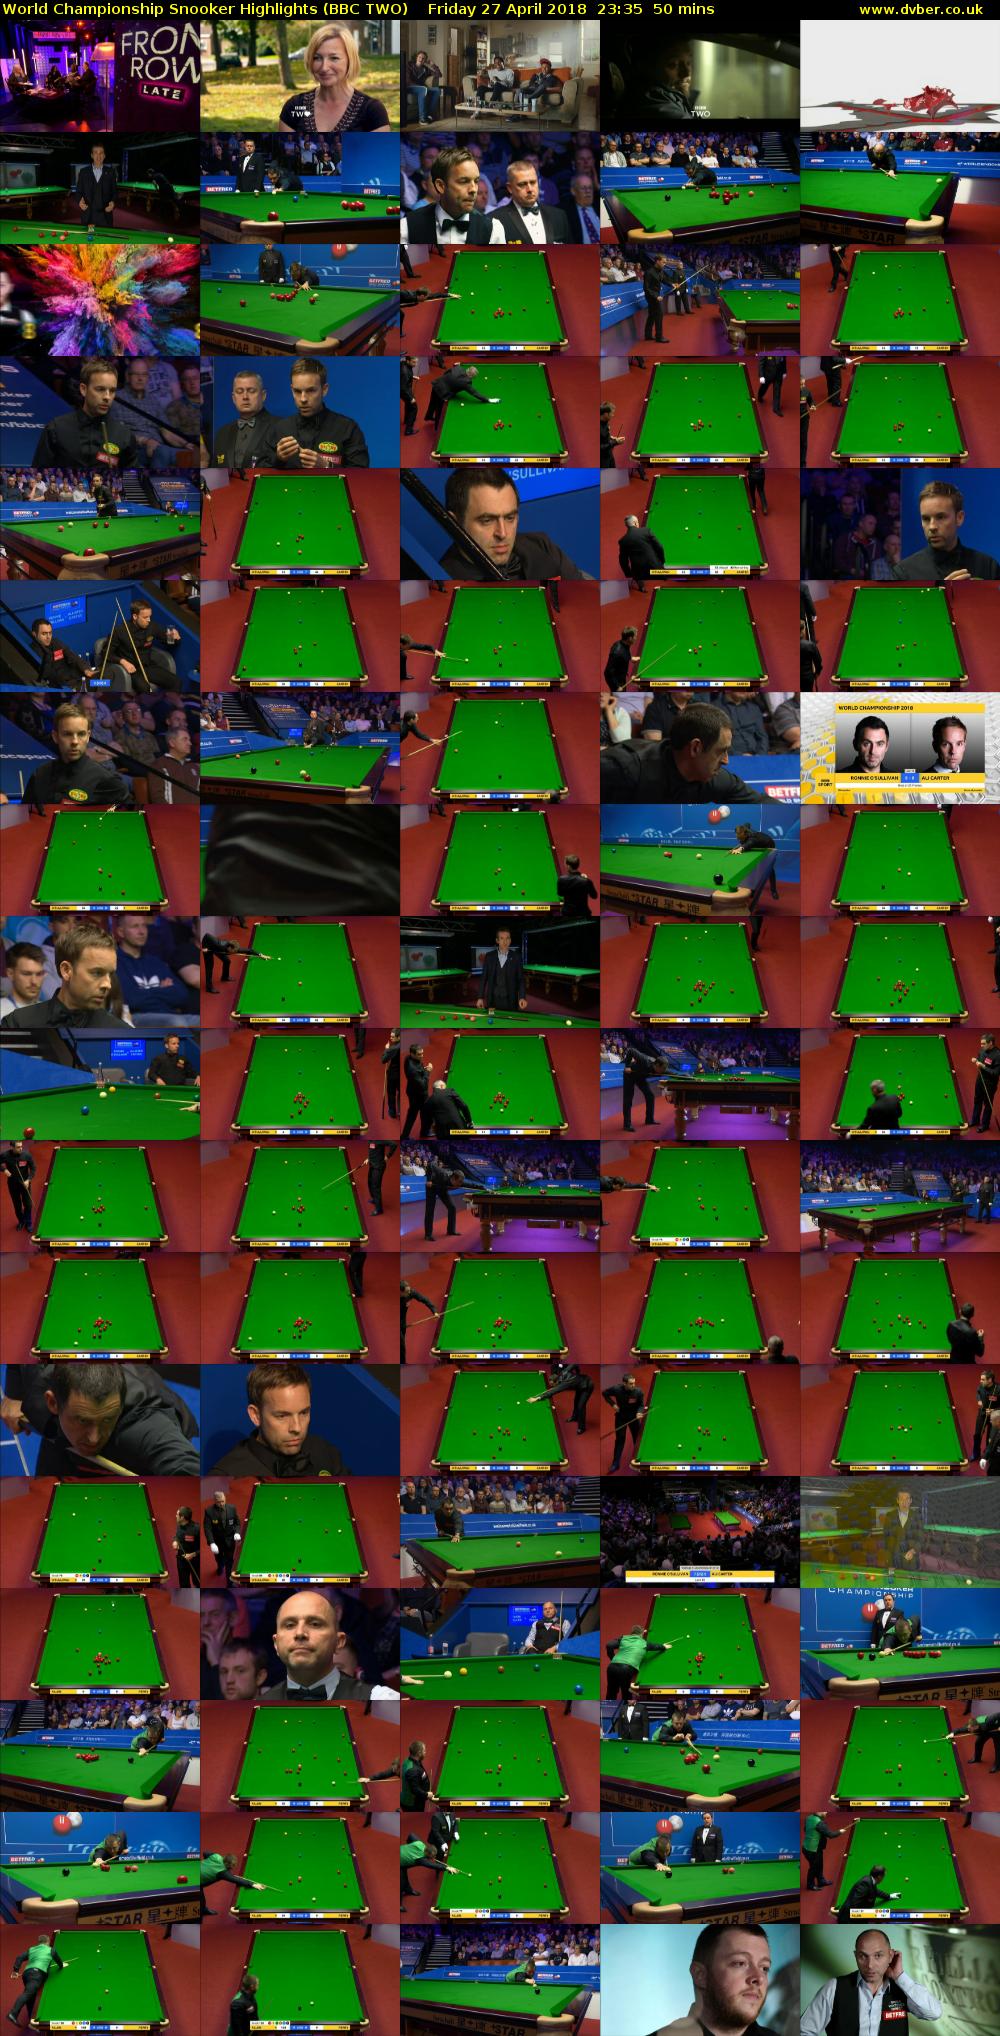 World Championship Snooker Highlights (BBC TWO) Friday 27 April 2018 23:35 - 00:25